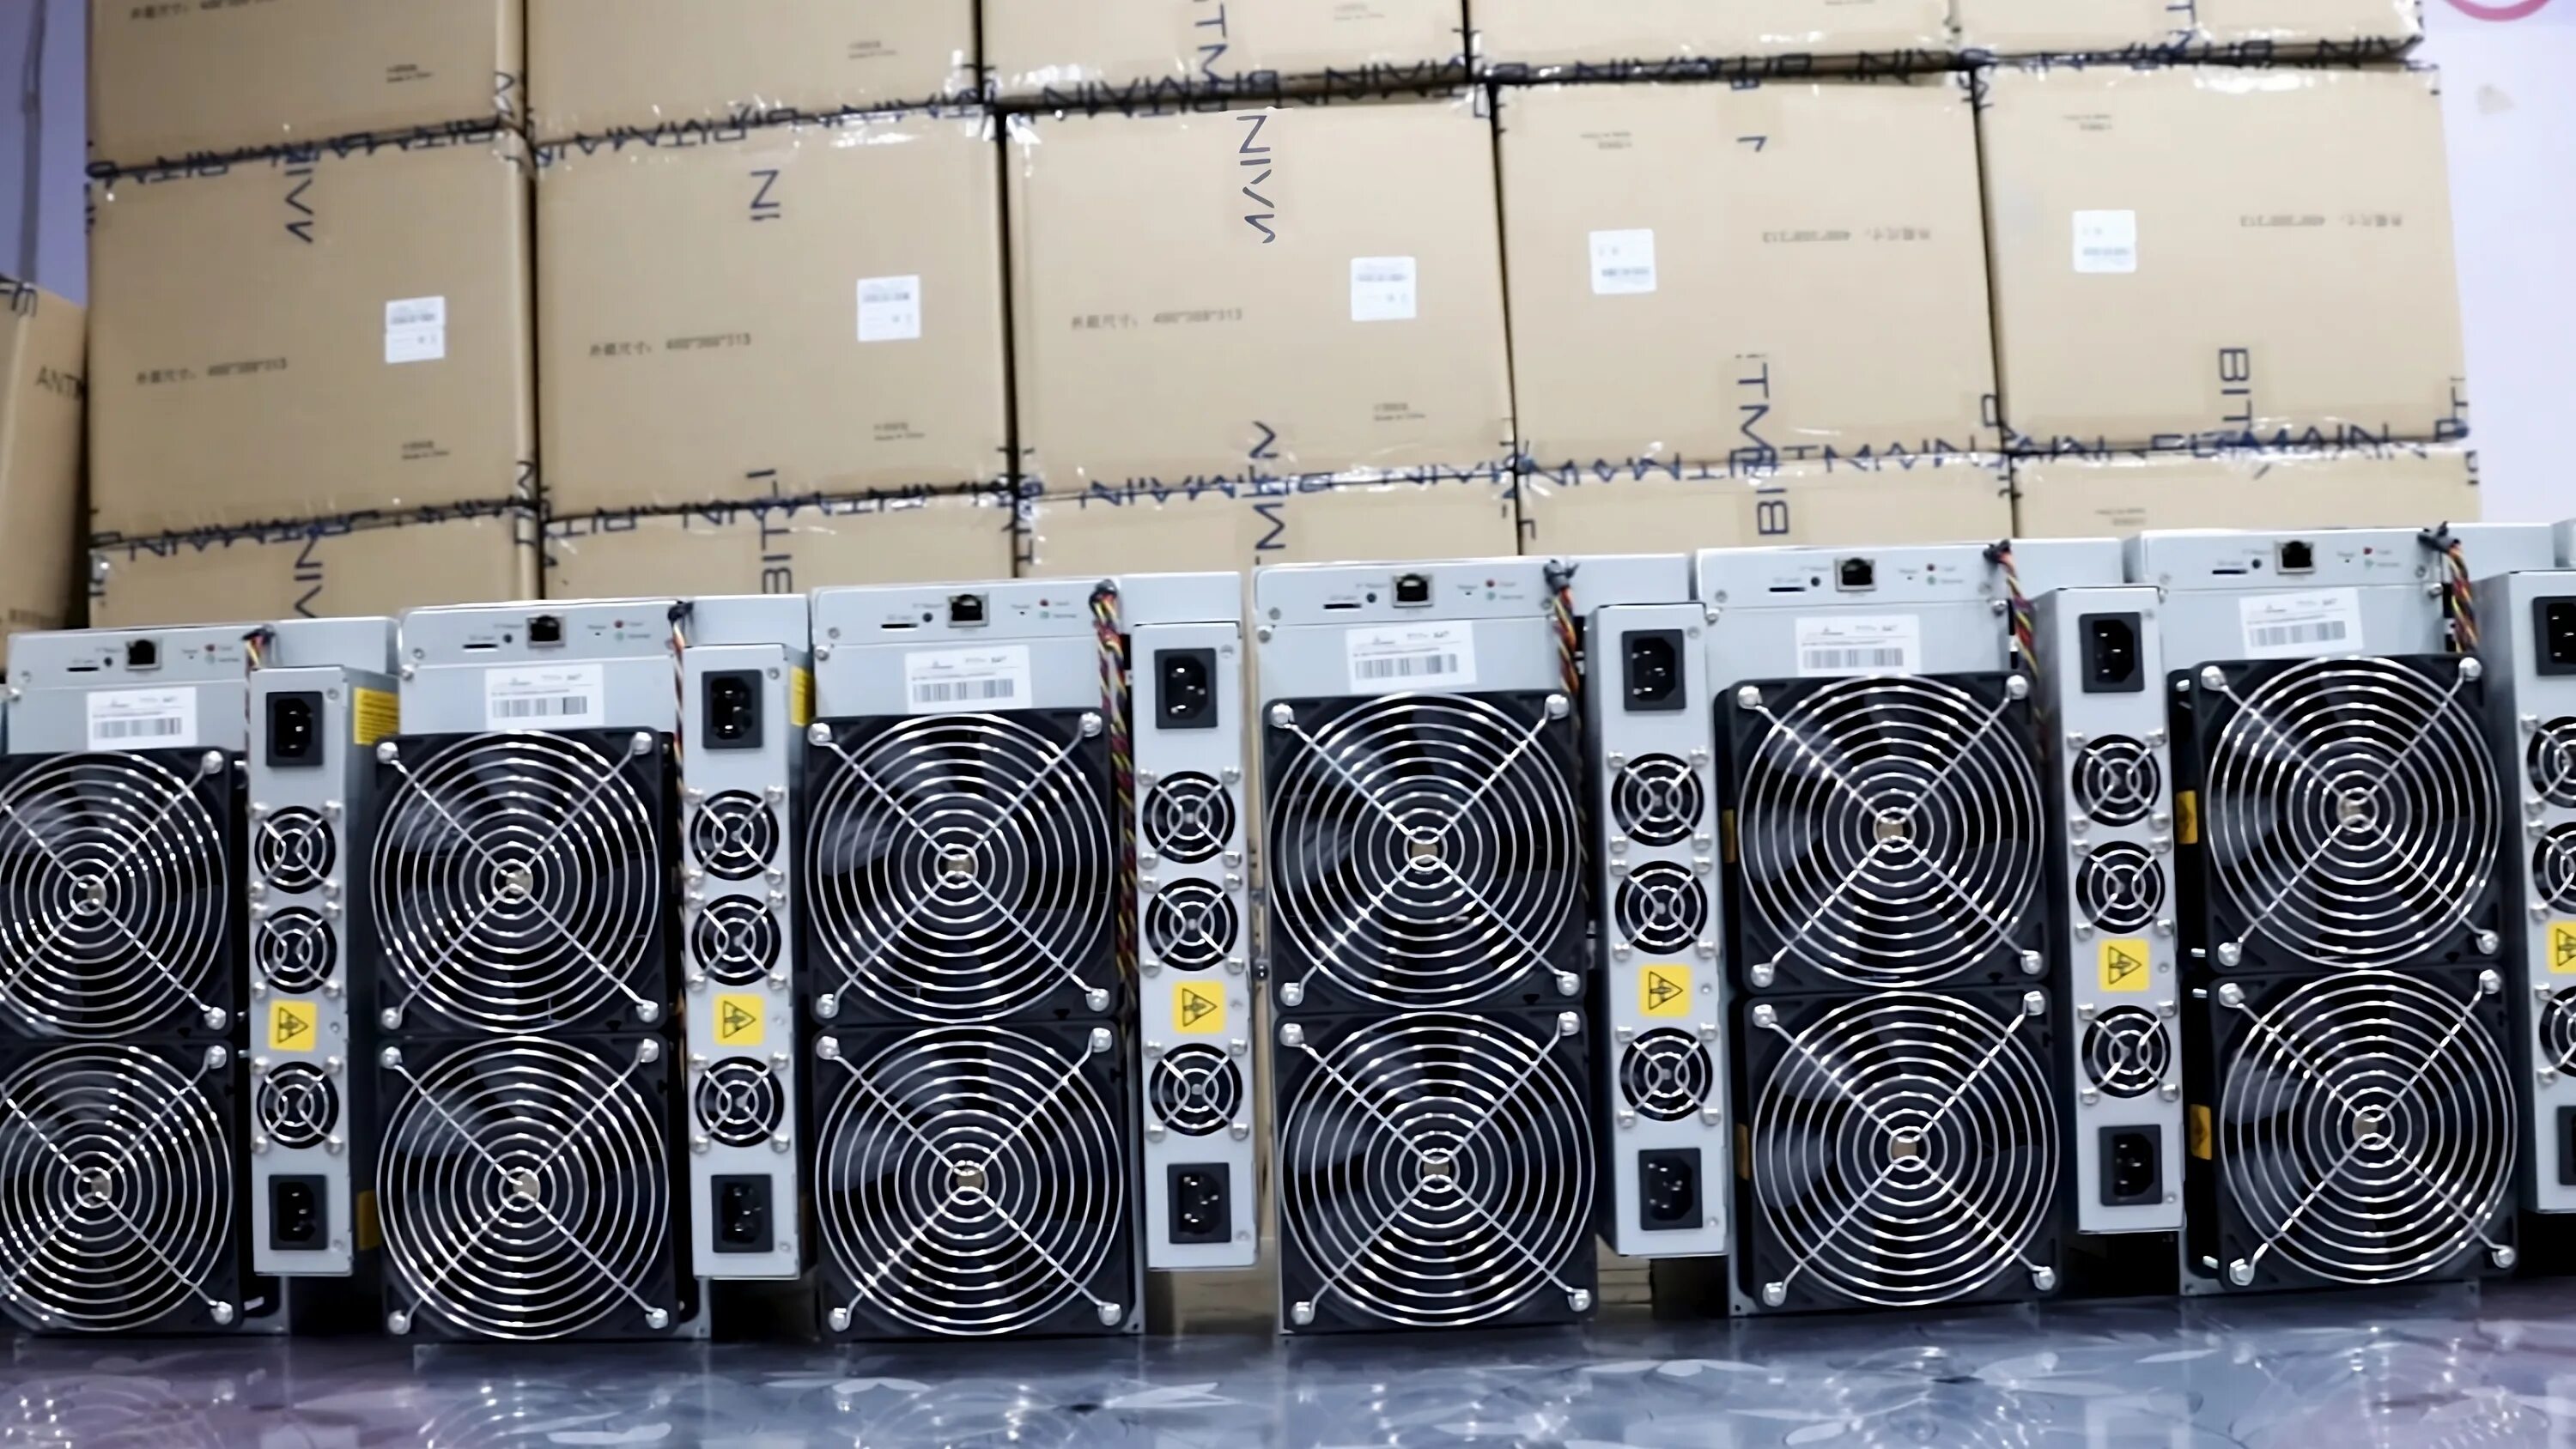 Antminer t21 190 th s. Antminer s19 Pro 110t. Bitmain s19 Pro 110. ASIC Bitmain Antminer l7 9500 MH/S. Antminer s17 Pro.